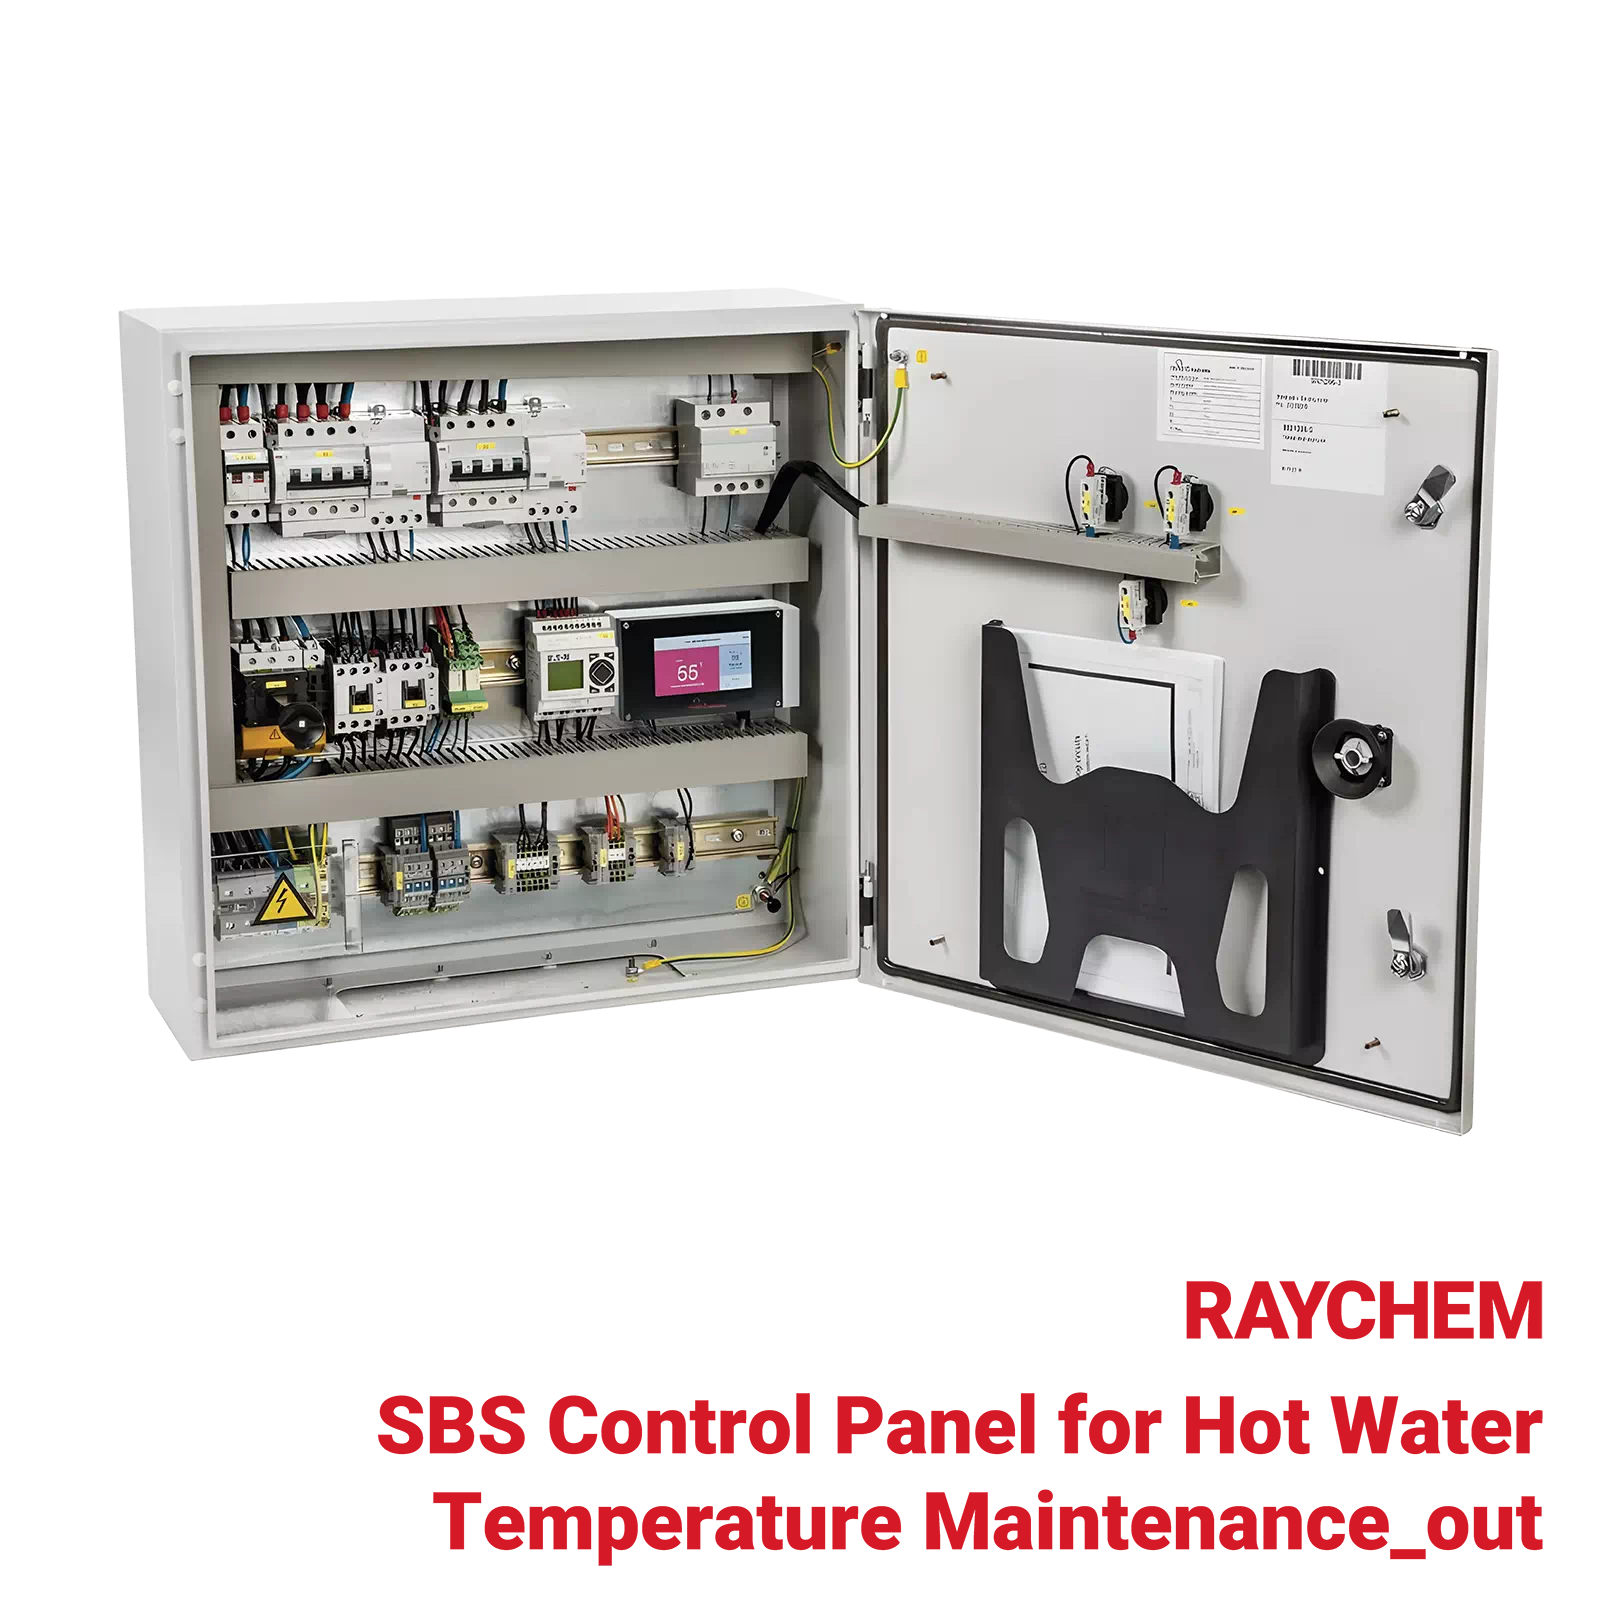 SBS-Control-Panel-for-Hot-Water-Raychem-Industrial-Heating